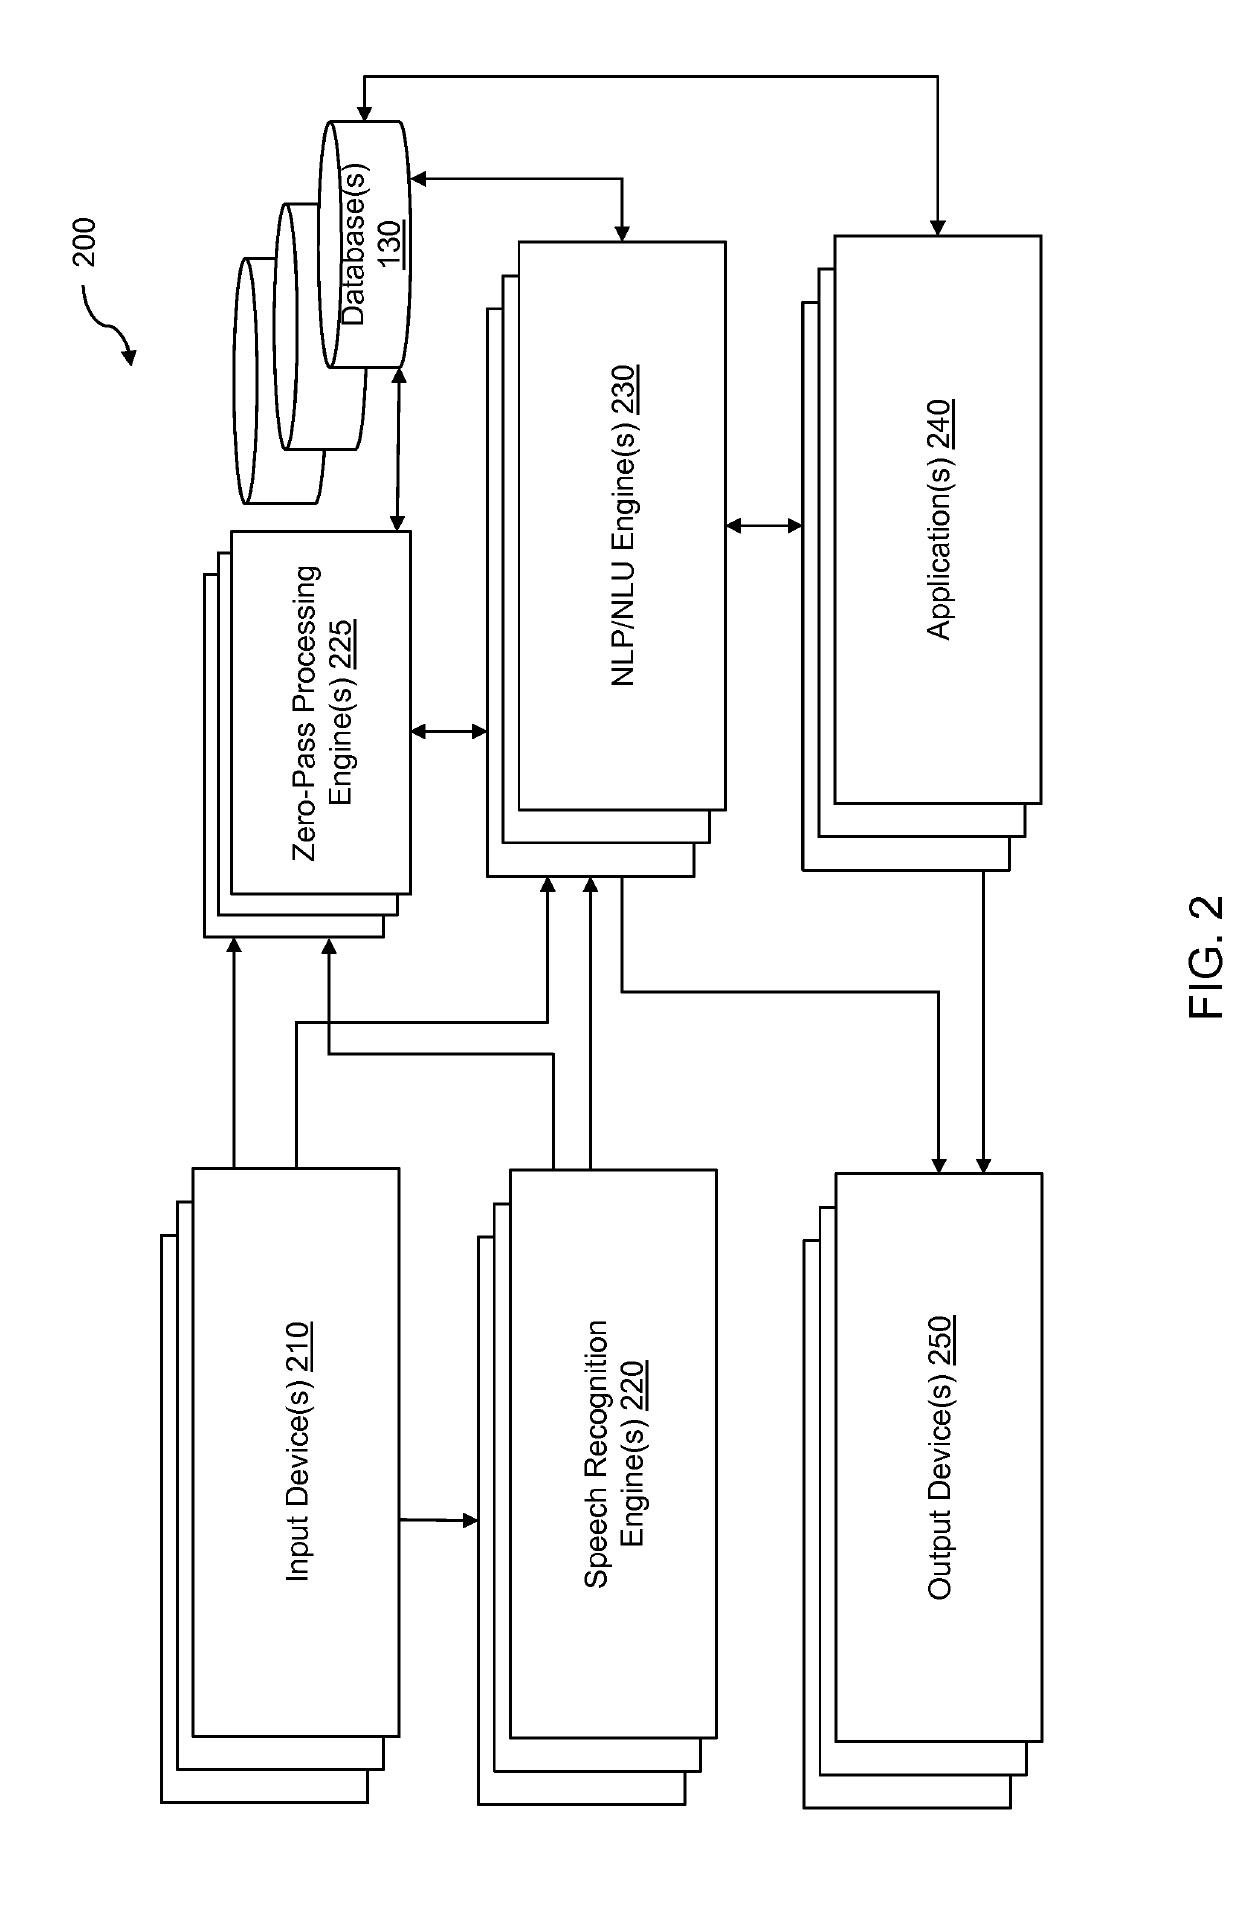 System and method of determining a domain and/or an action related to a natural language input